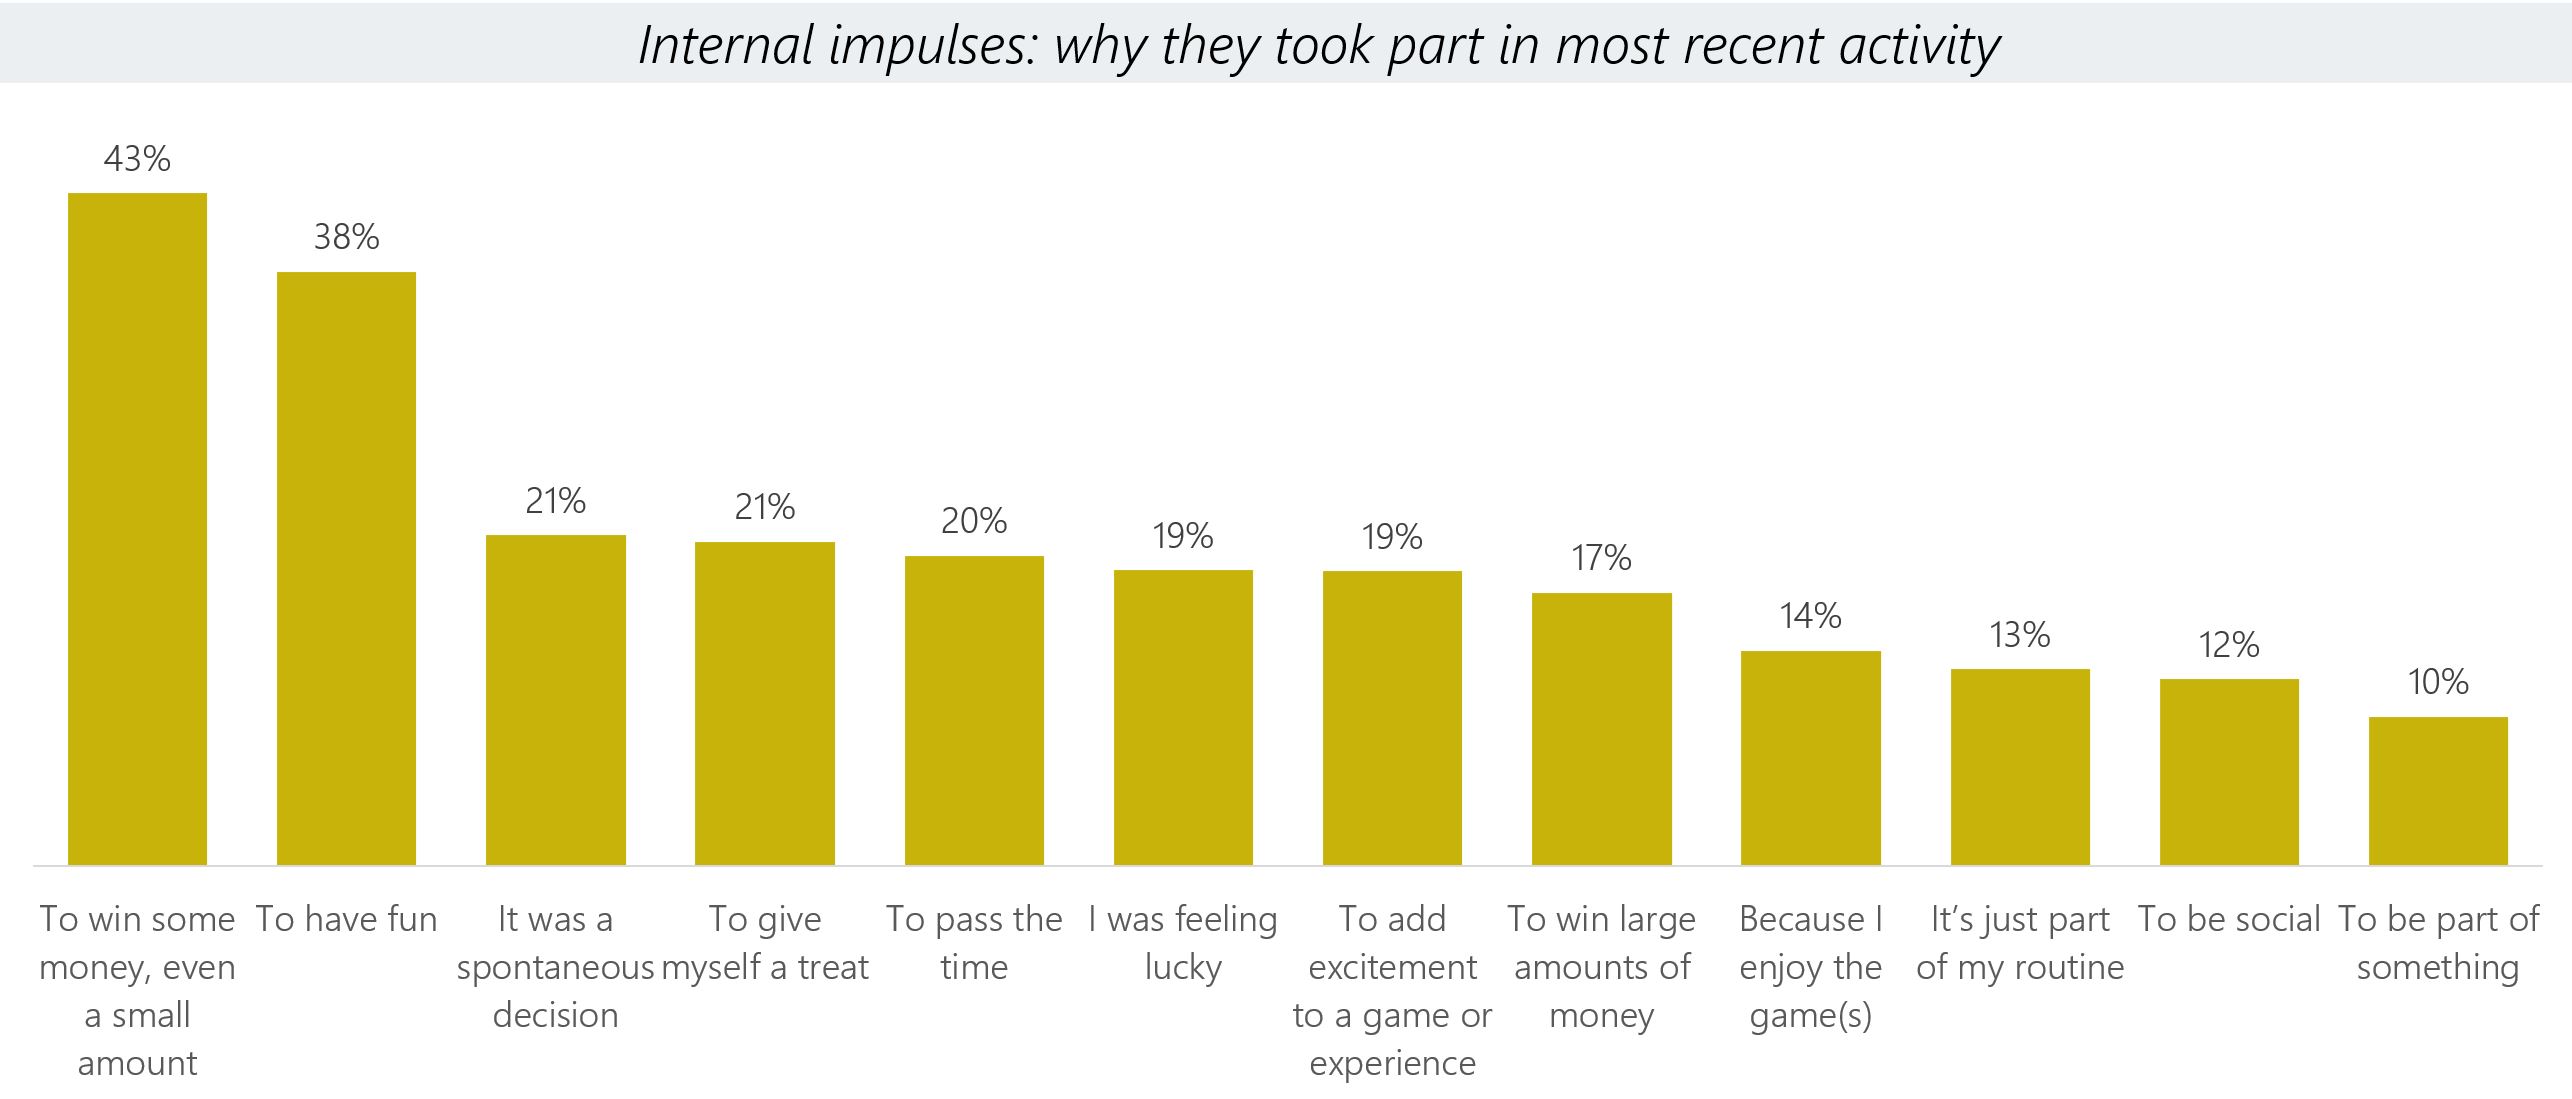 A bar chart showing the percentages of reasons why people took part in recent gambling activity. Data from the chart is provided within the following table.